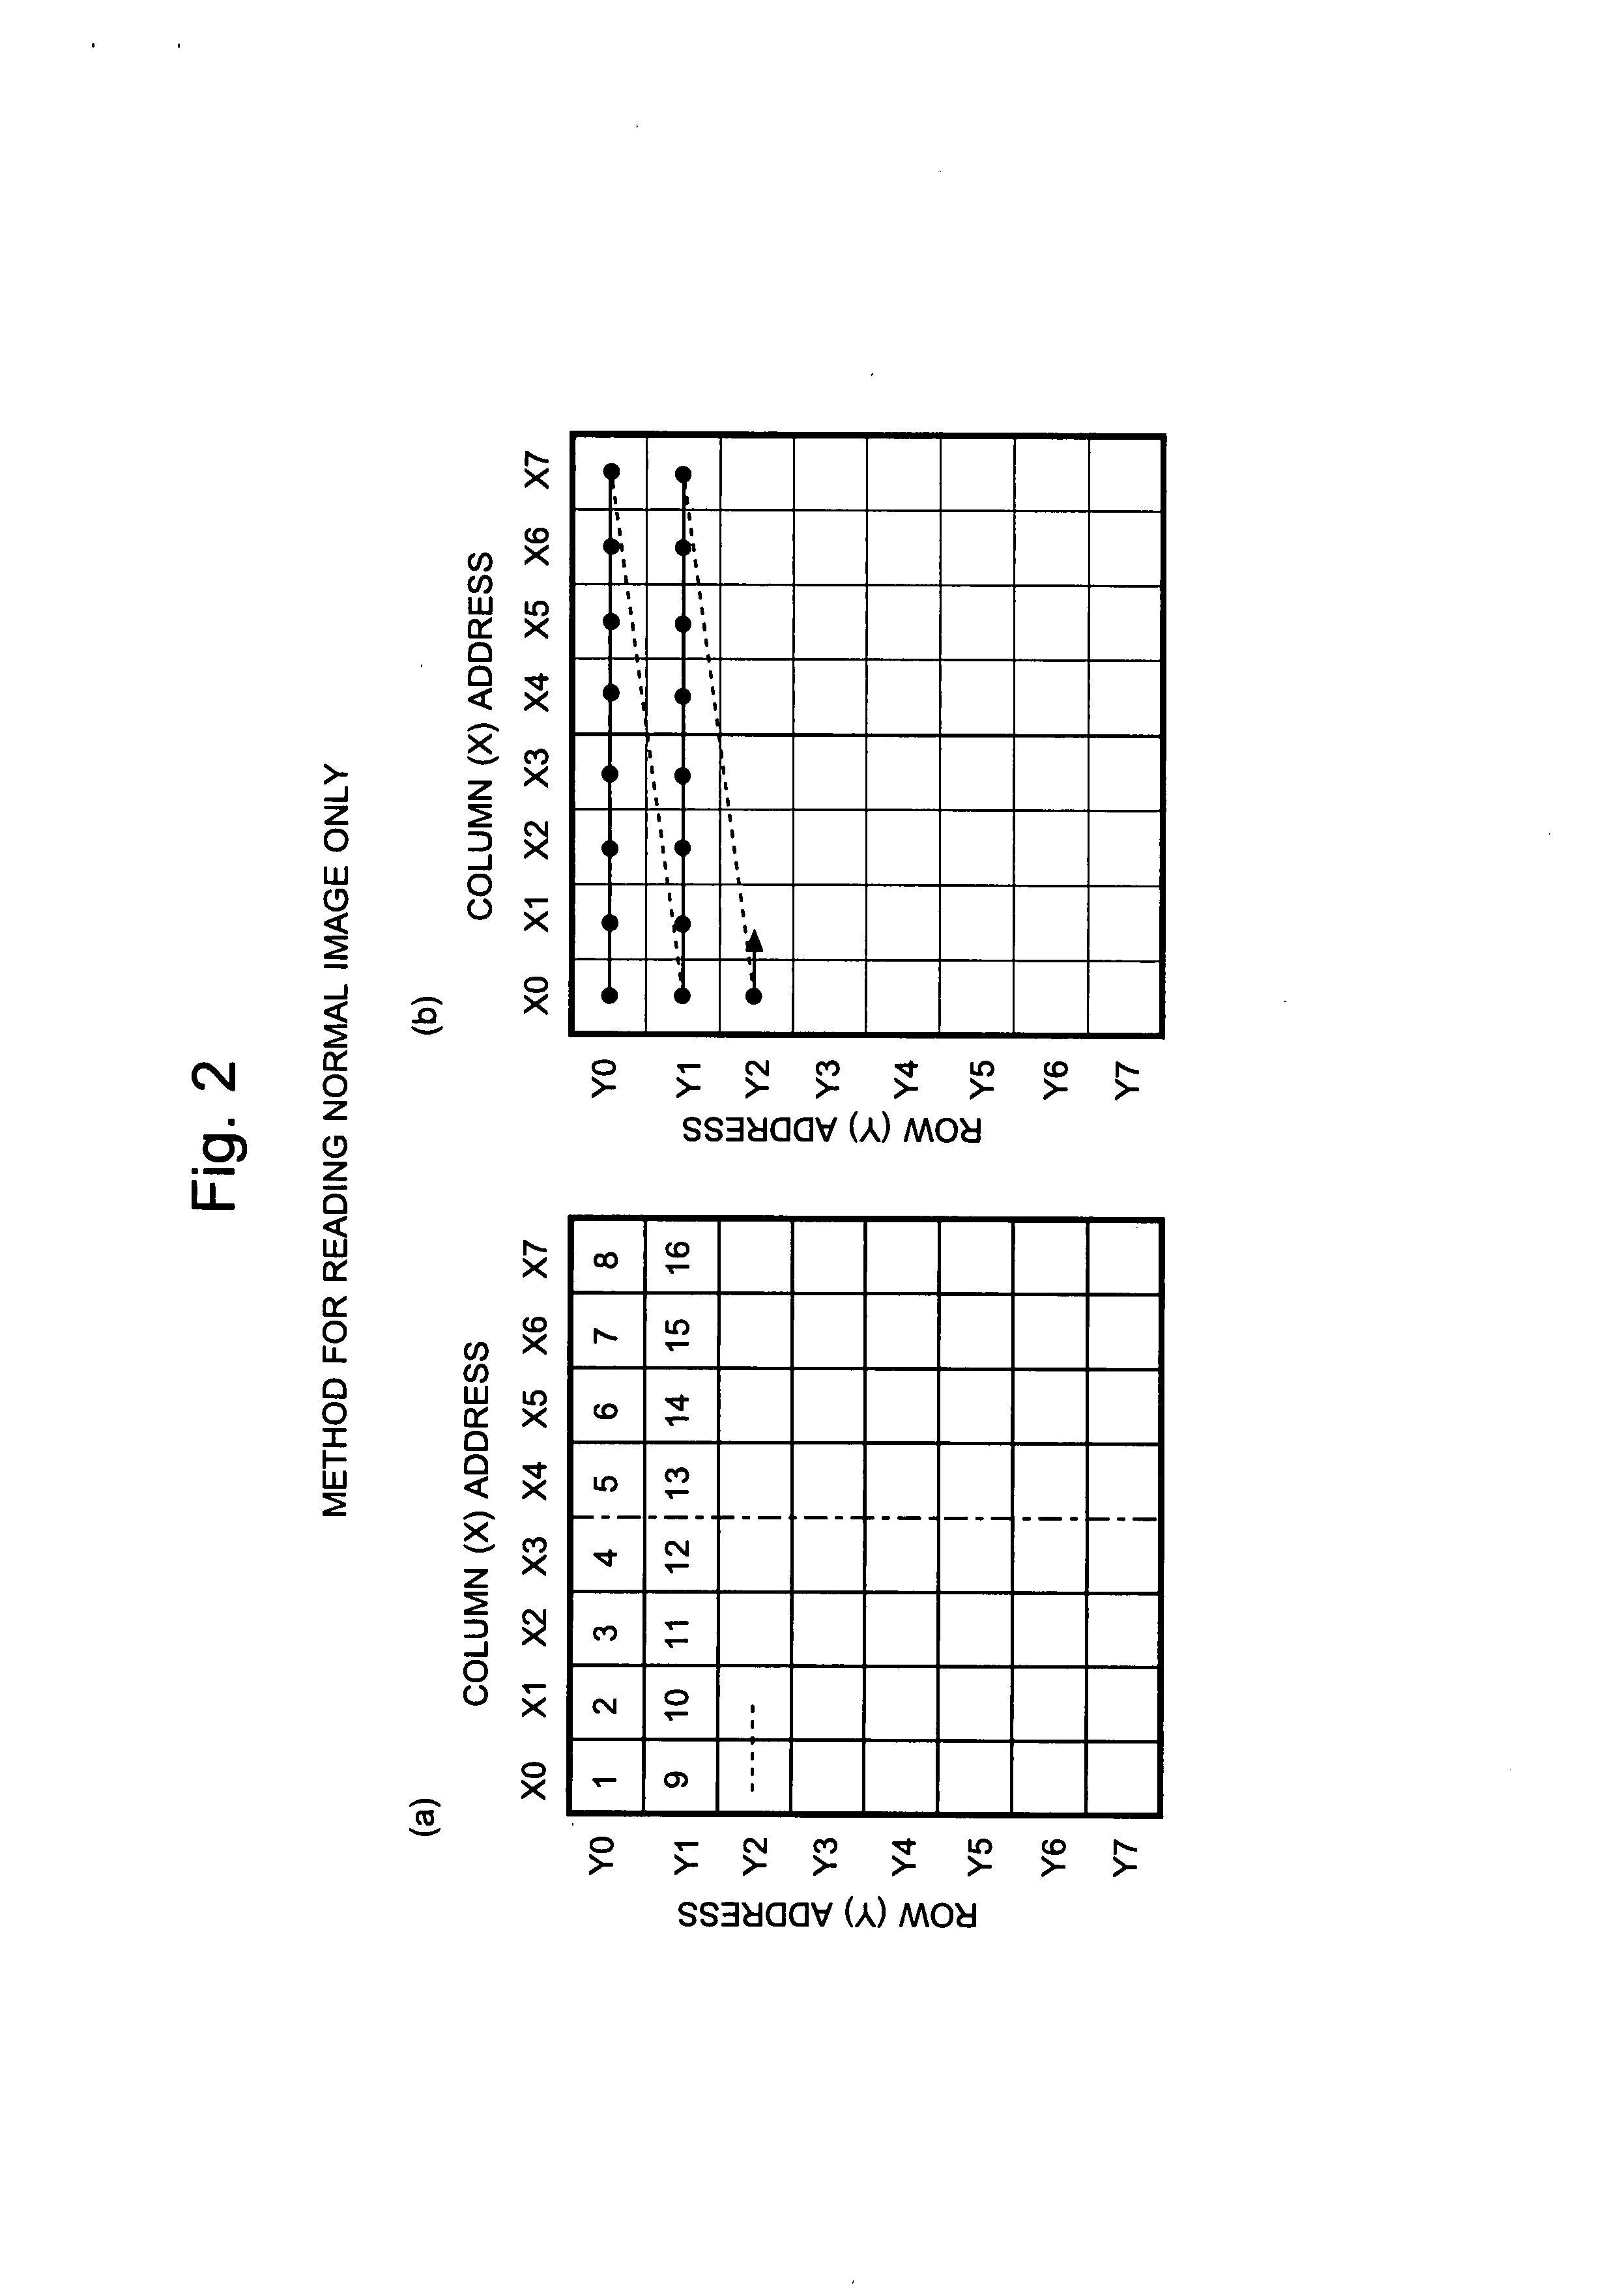 Imaging Device and Method for Reading Signals From Such Device